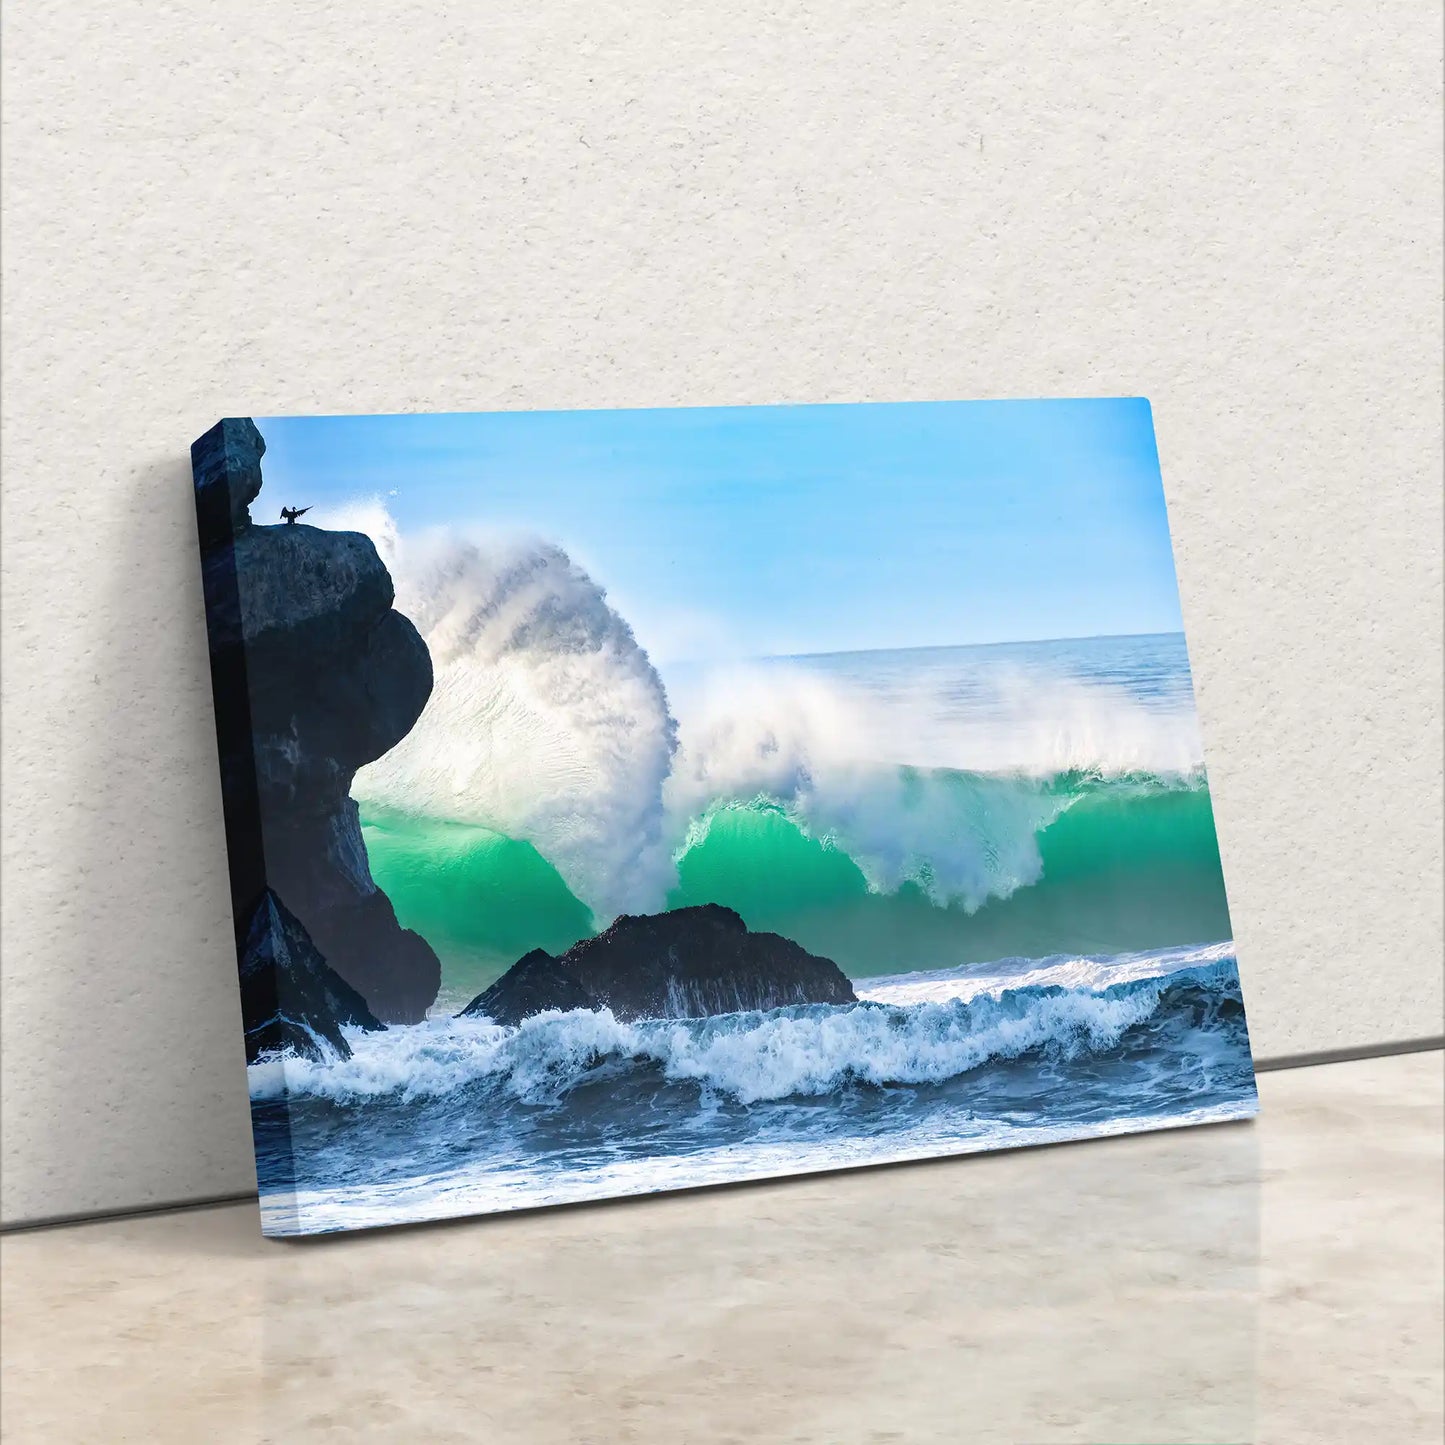 Leaning canvas print of a massive ocean wave near Morro Rock, with vivid colors and a dynamic spray, against a white wall.